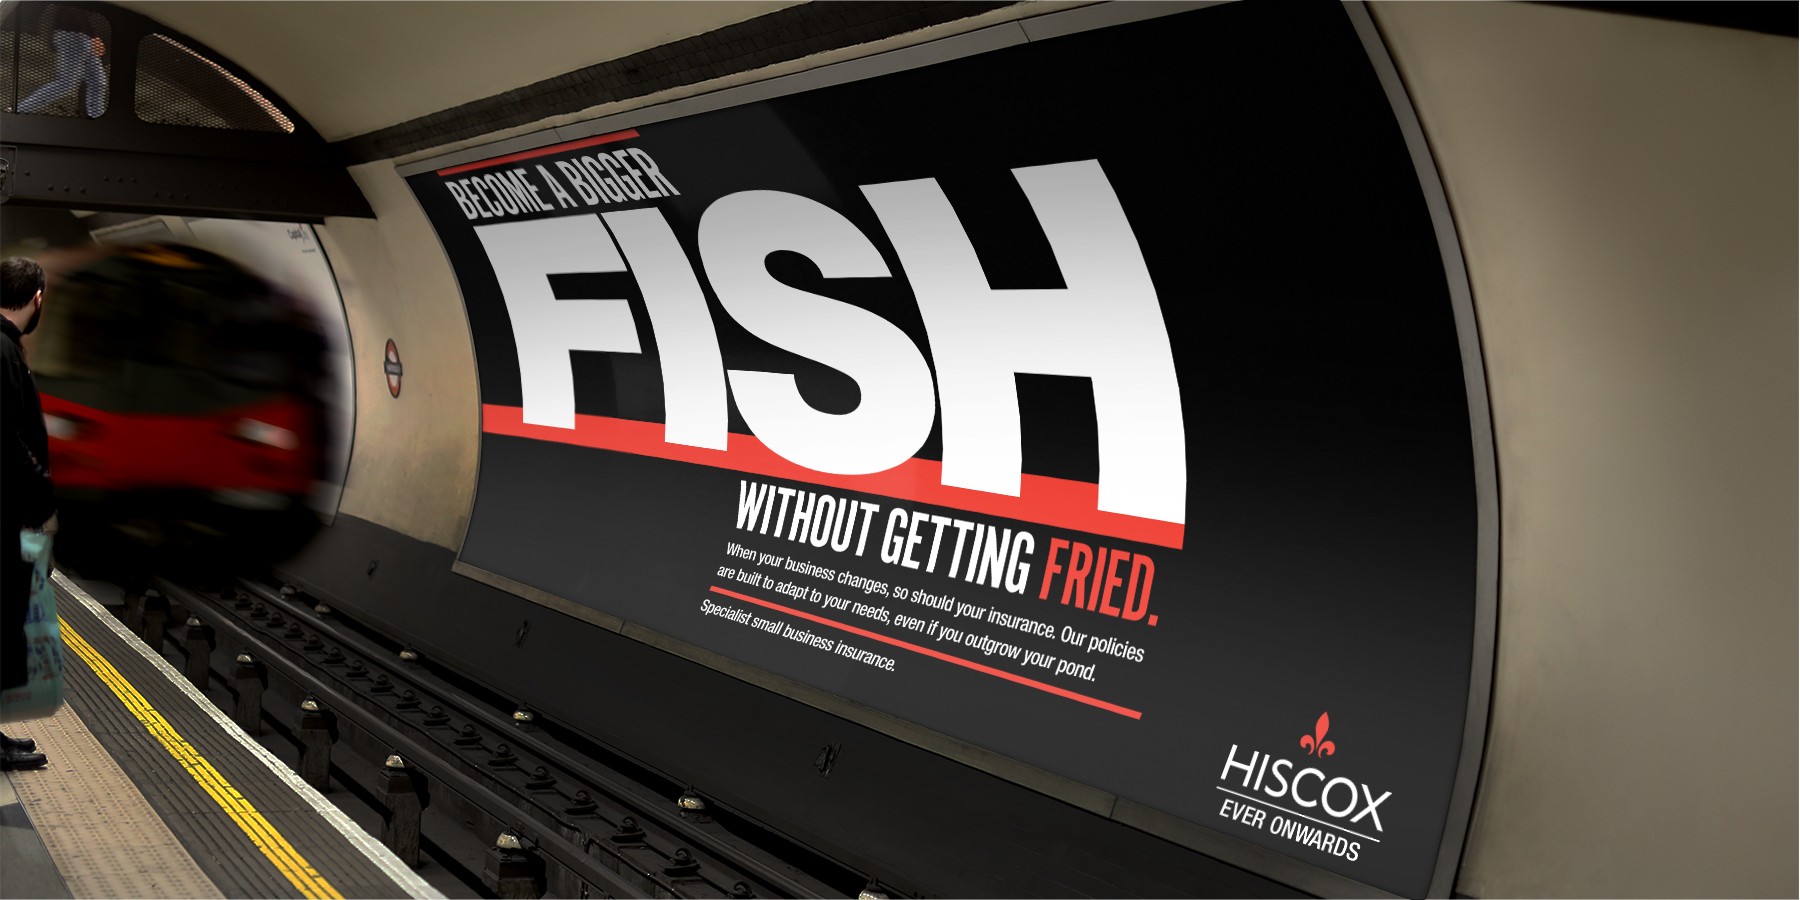 Our advertising | Hiscox Group